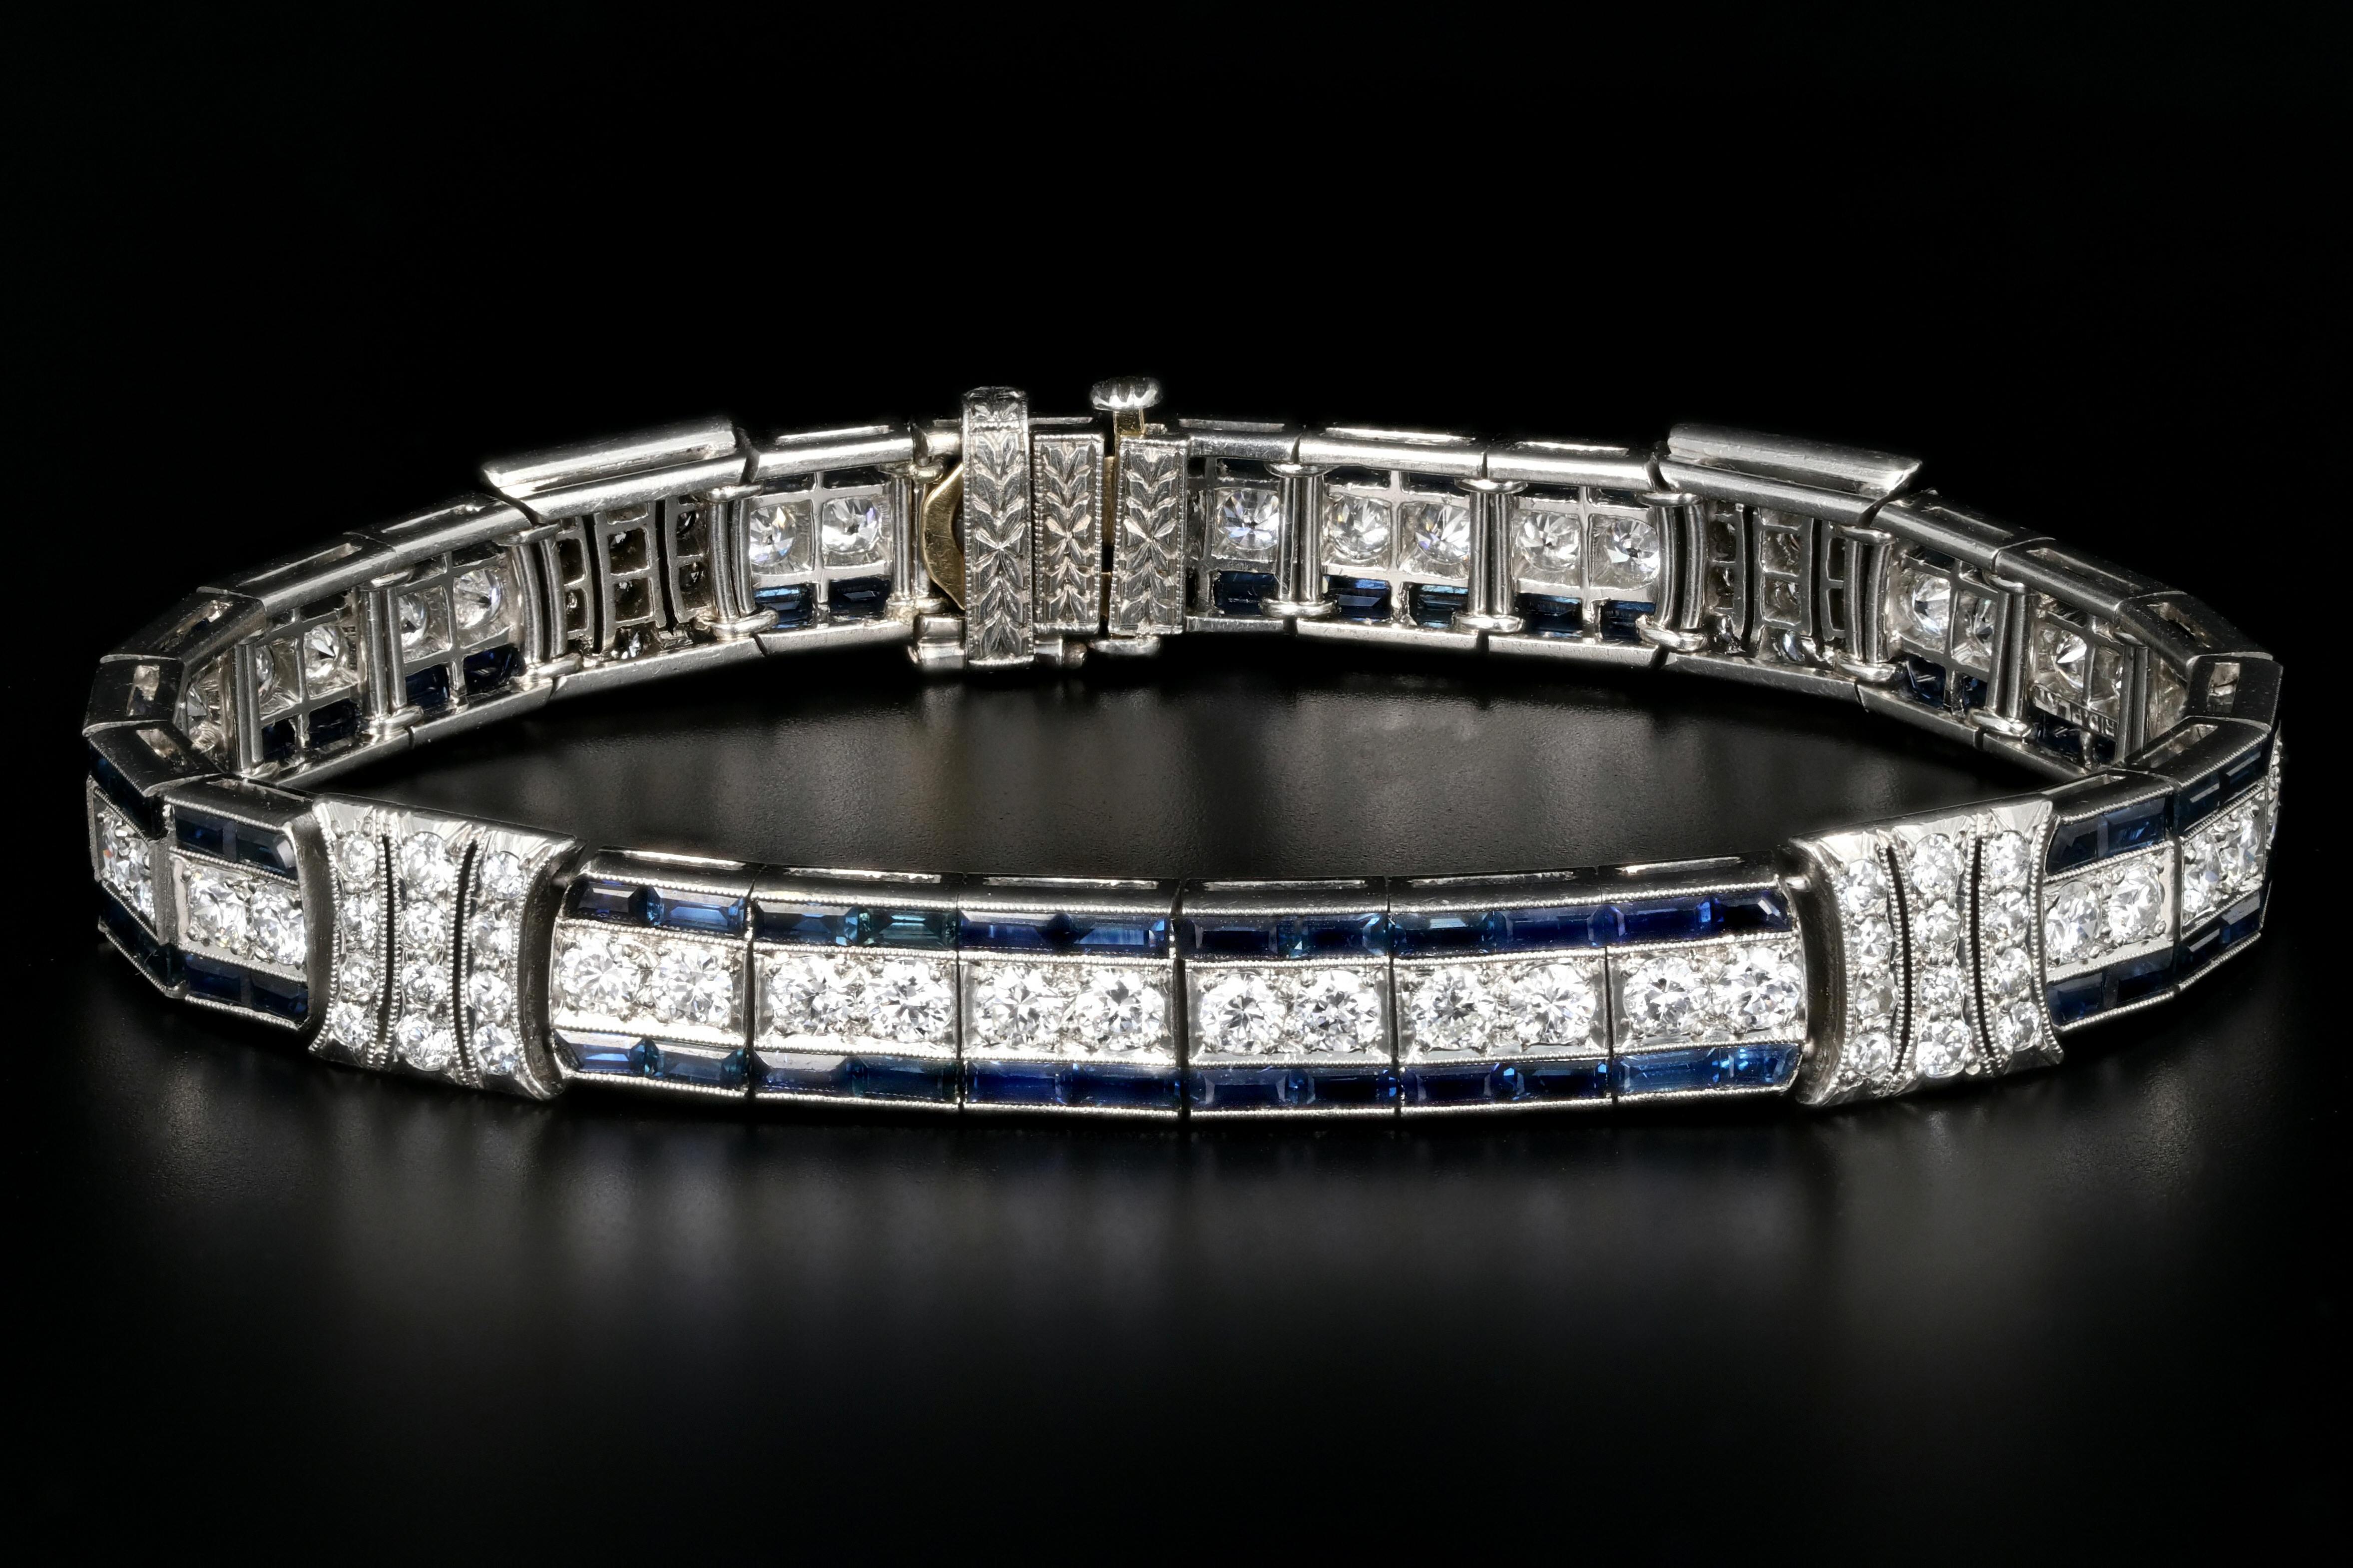 Era: Art Deco c.1925

Designer: Tiffany & Co.

Hallmarks: Tiffany & Co.

Composition: Platinum

Primary Stone: Old European Cut Diamonds

Stone Carat Weight: Approximately 5.5 Carats

Color/ Clarity: F/G VS1/2

Accent Stone: Baguette Cut Natural